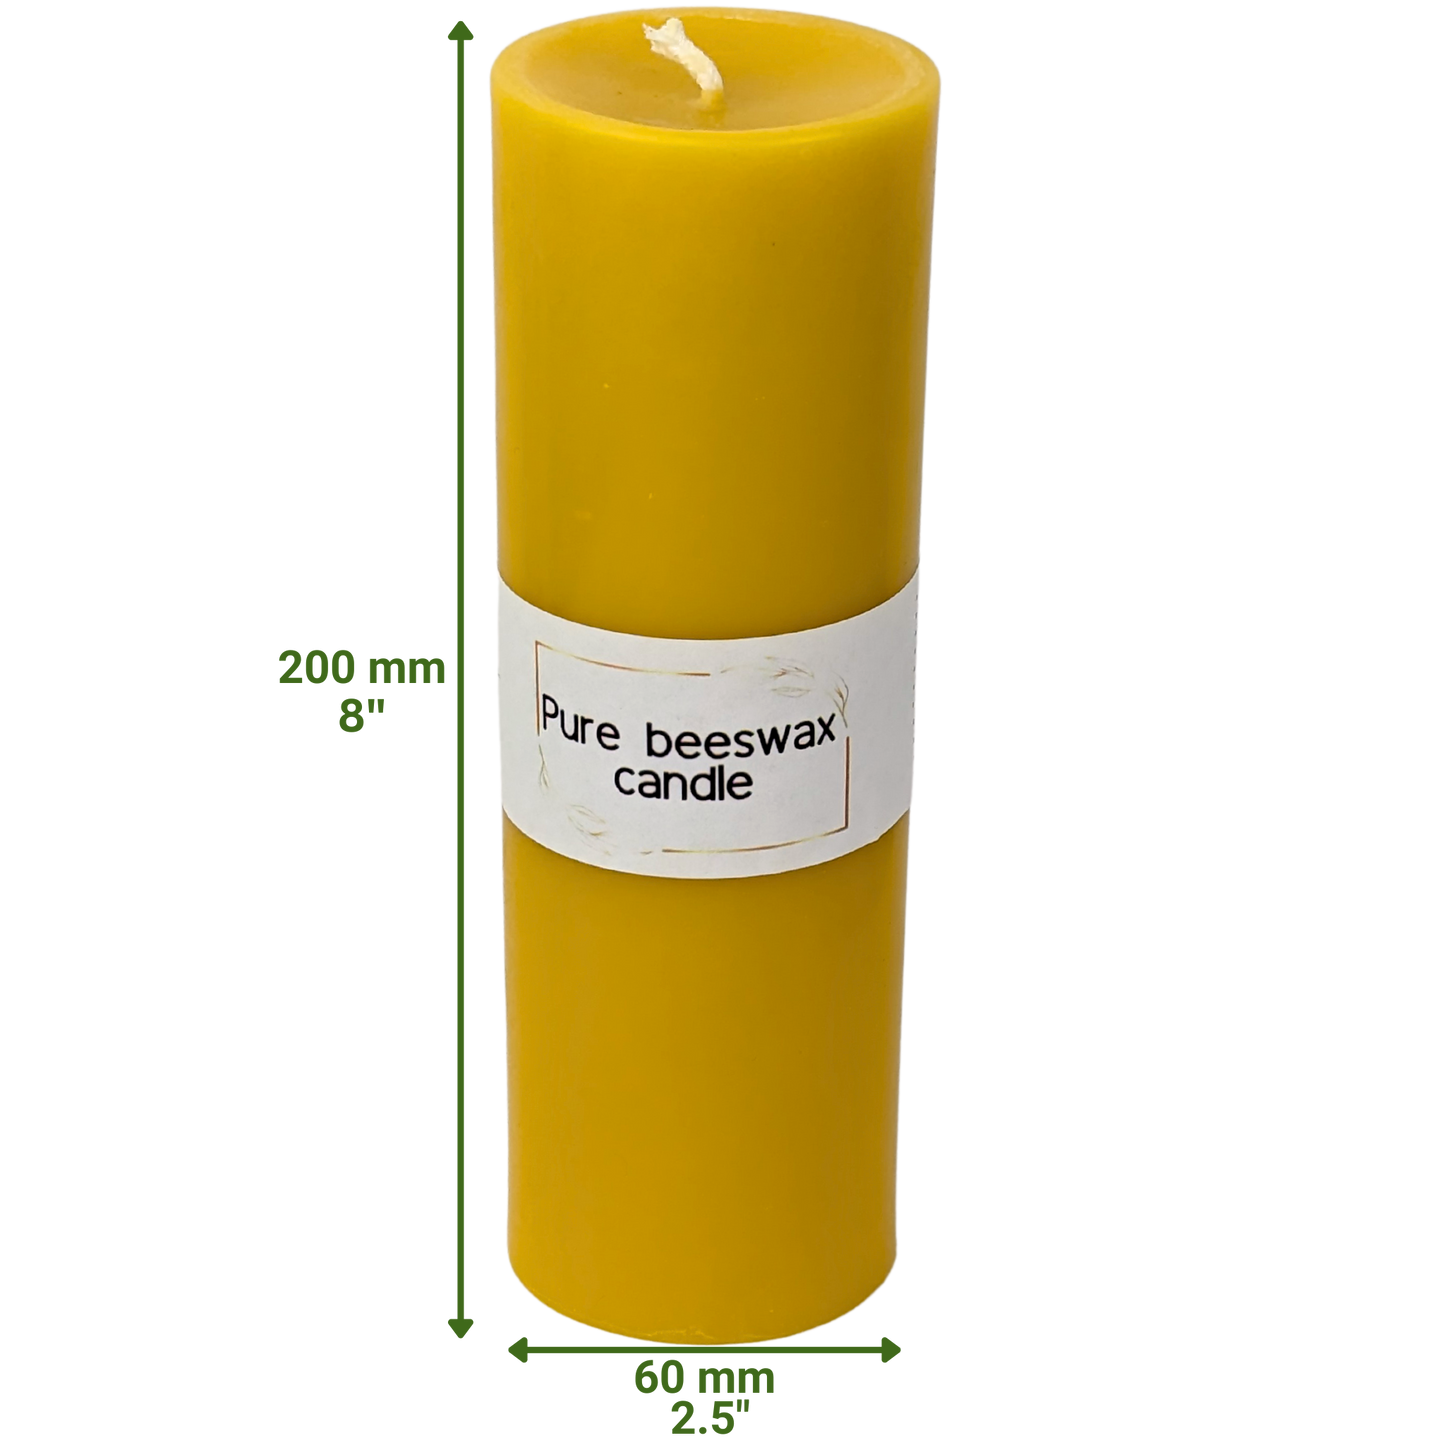 Pure beeswax pillar candle, hypoallergenic with a clean burn, placed beside lavender.